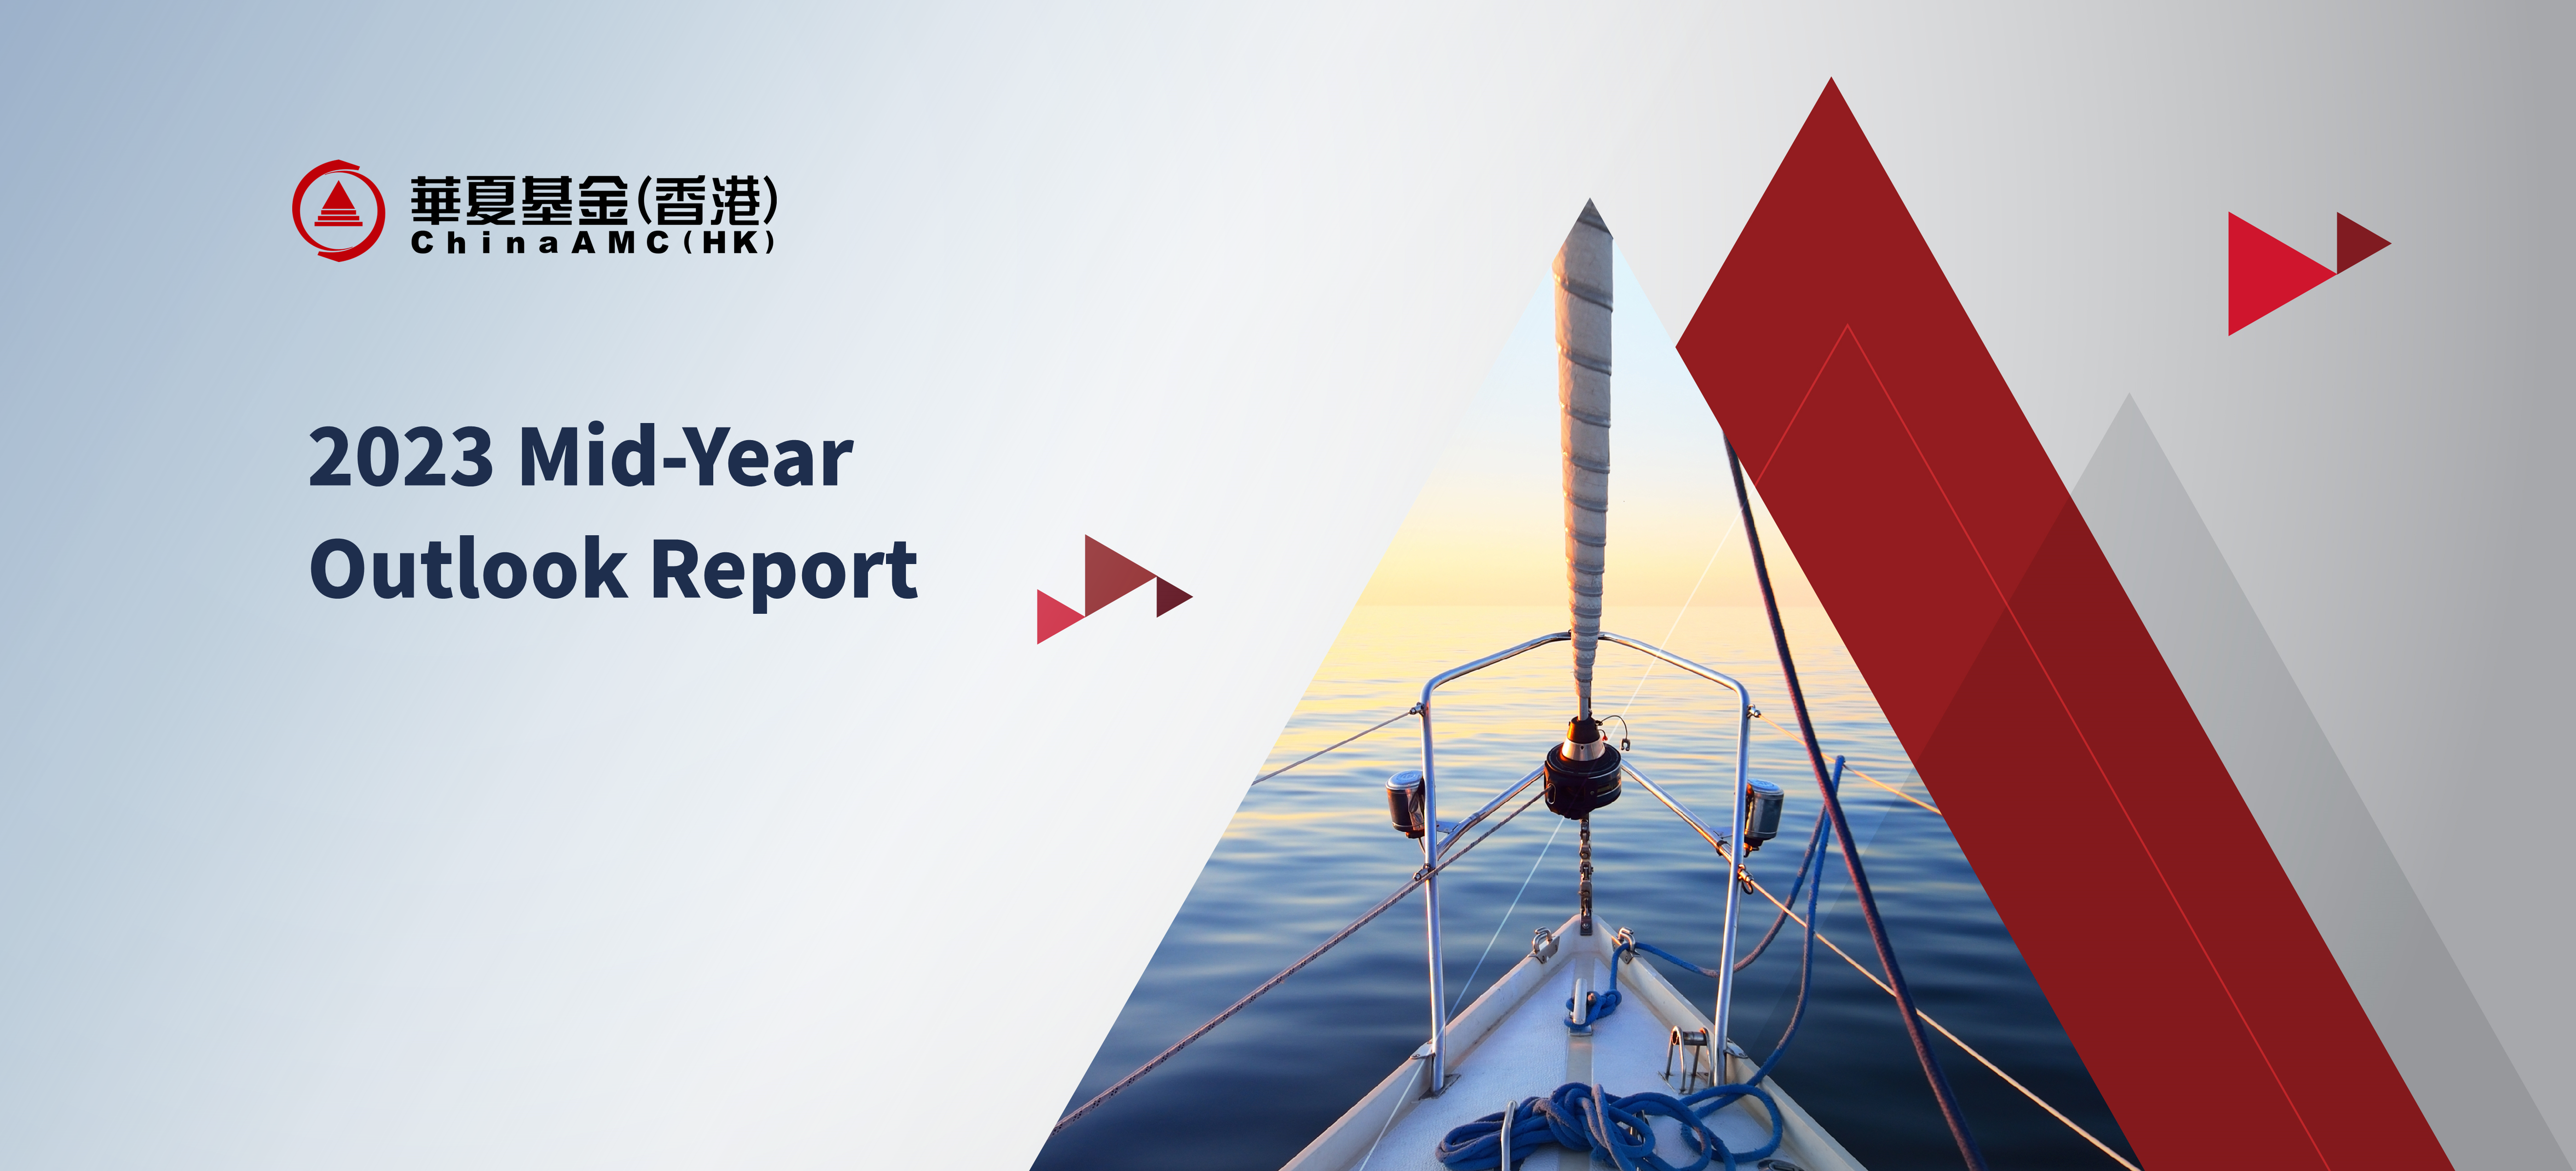 2023 Mid-Year Outlook Report